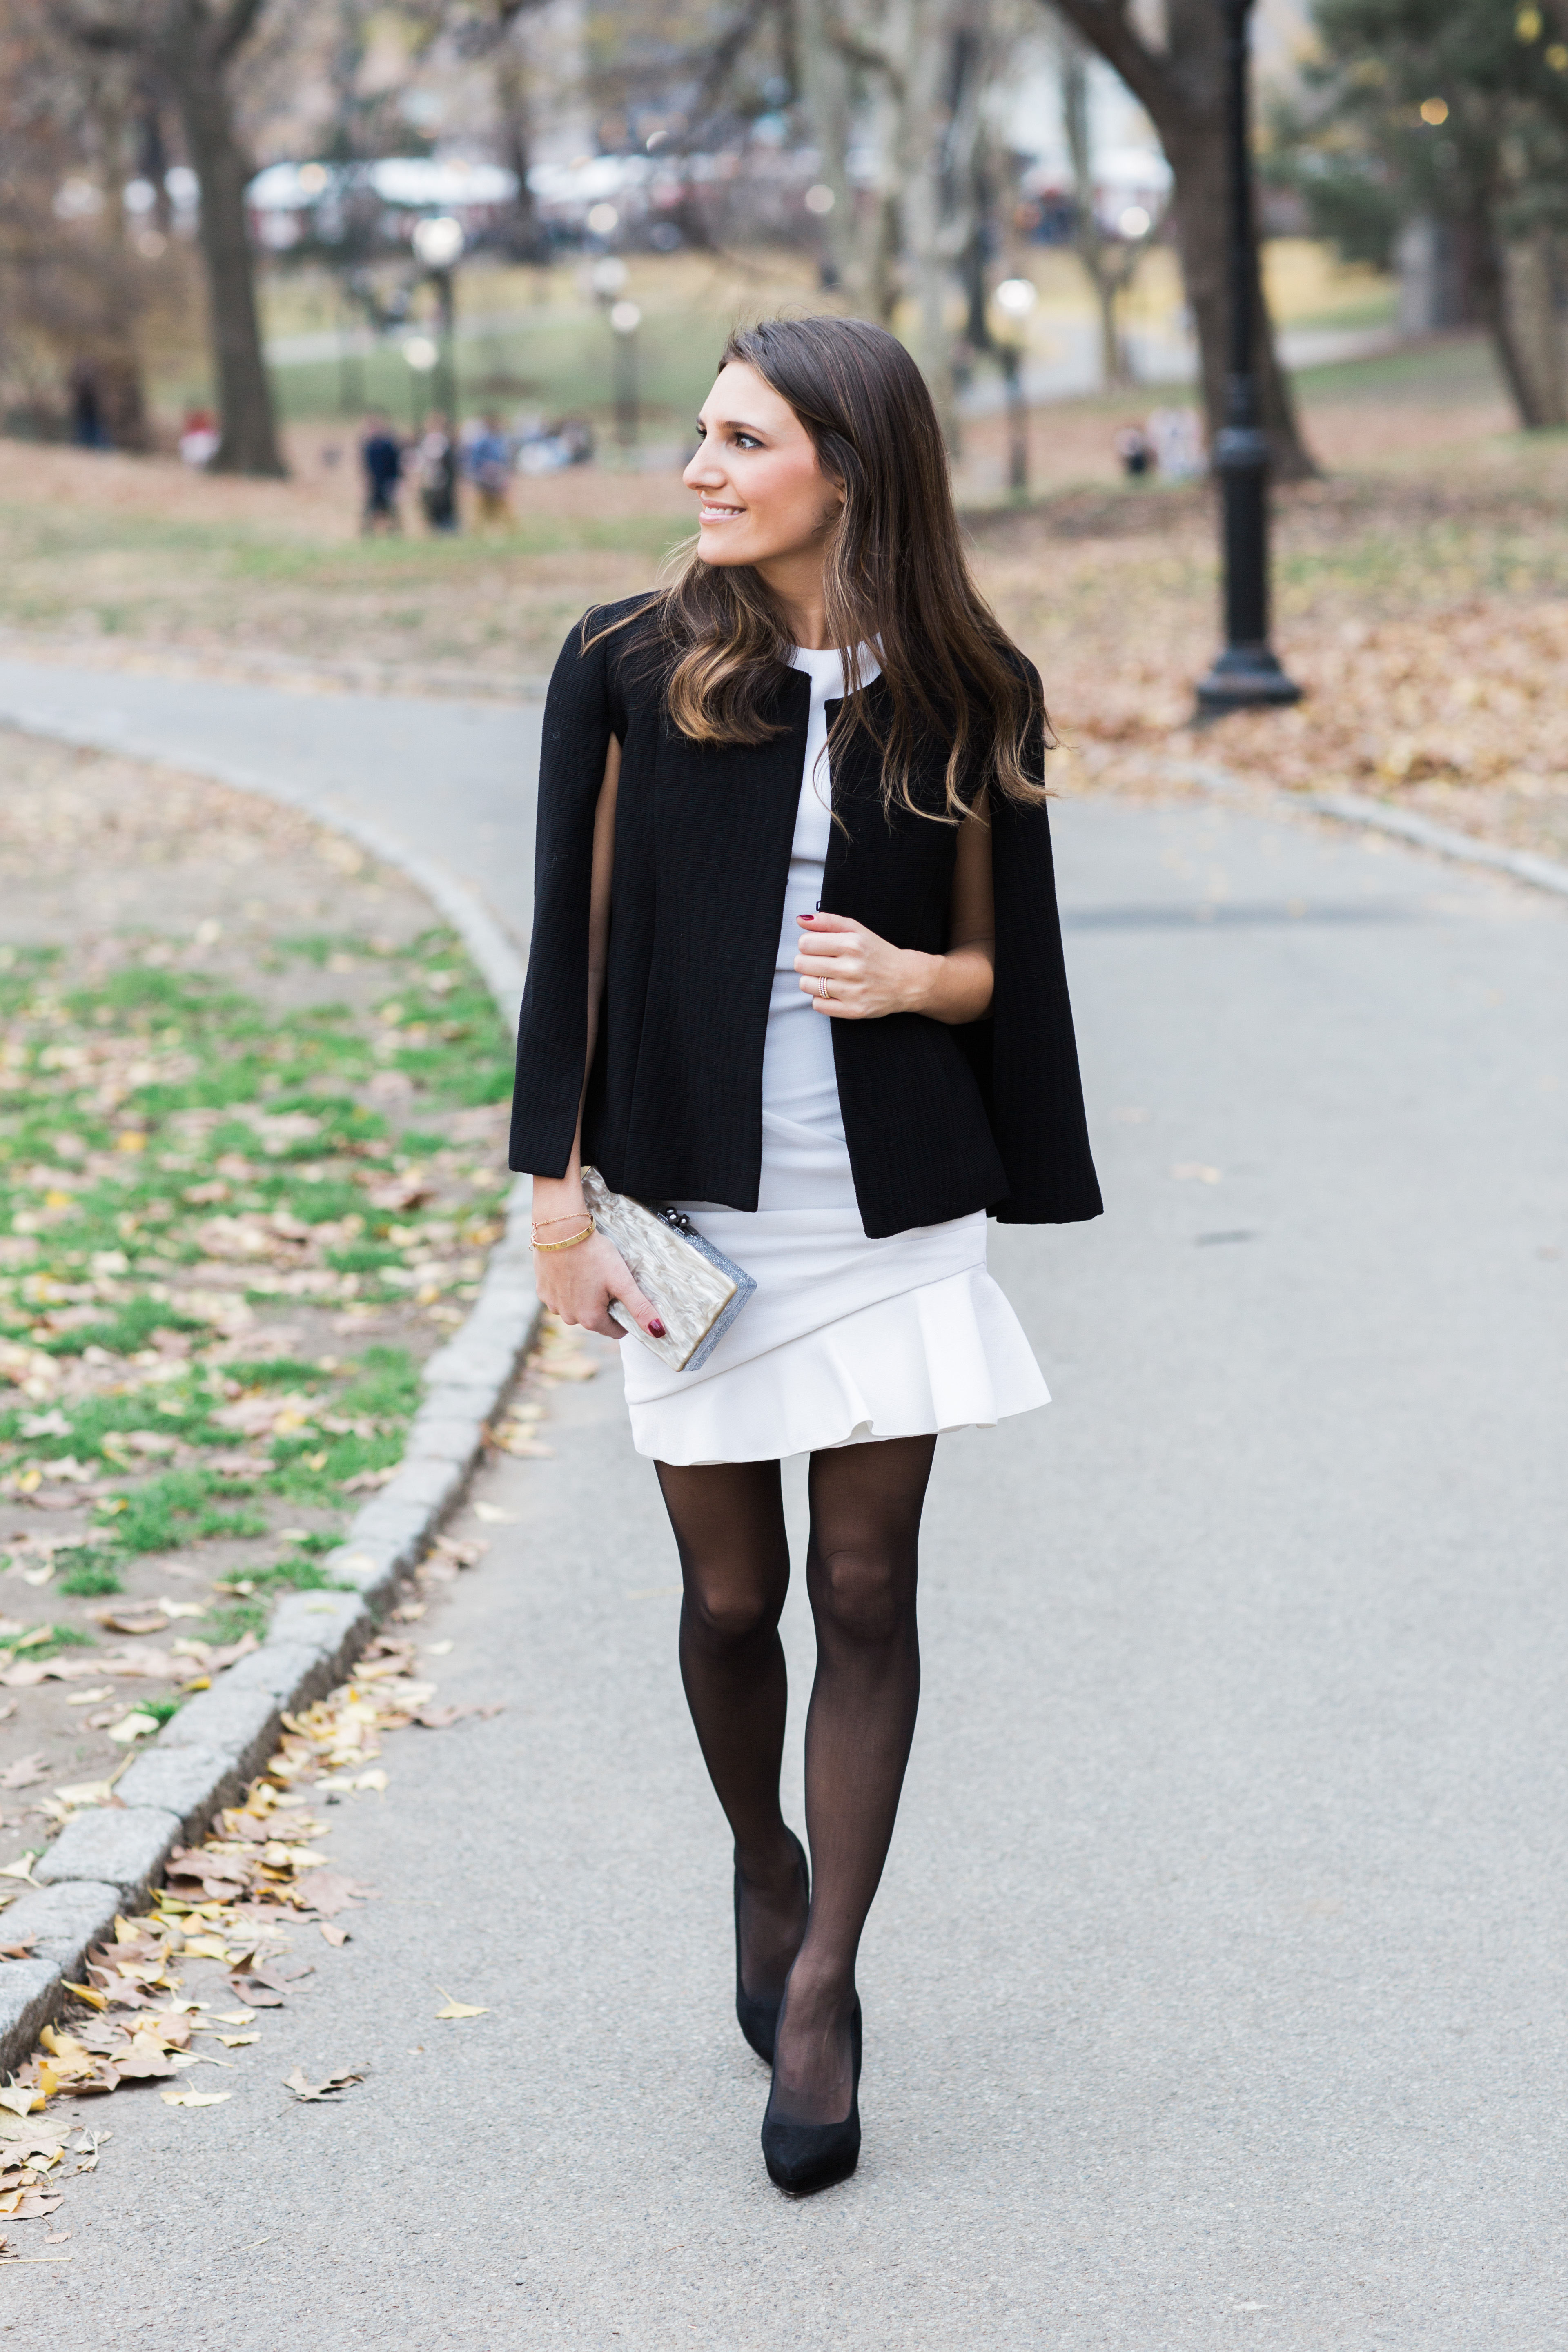 Winter White Dress With Tights | vlr.eng.br